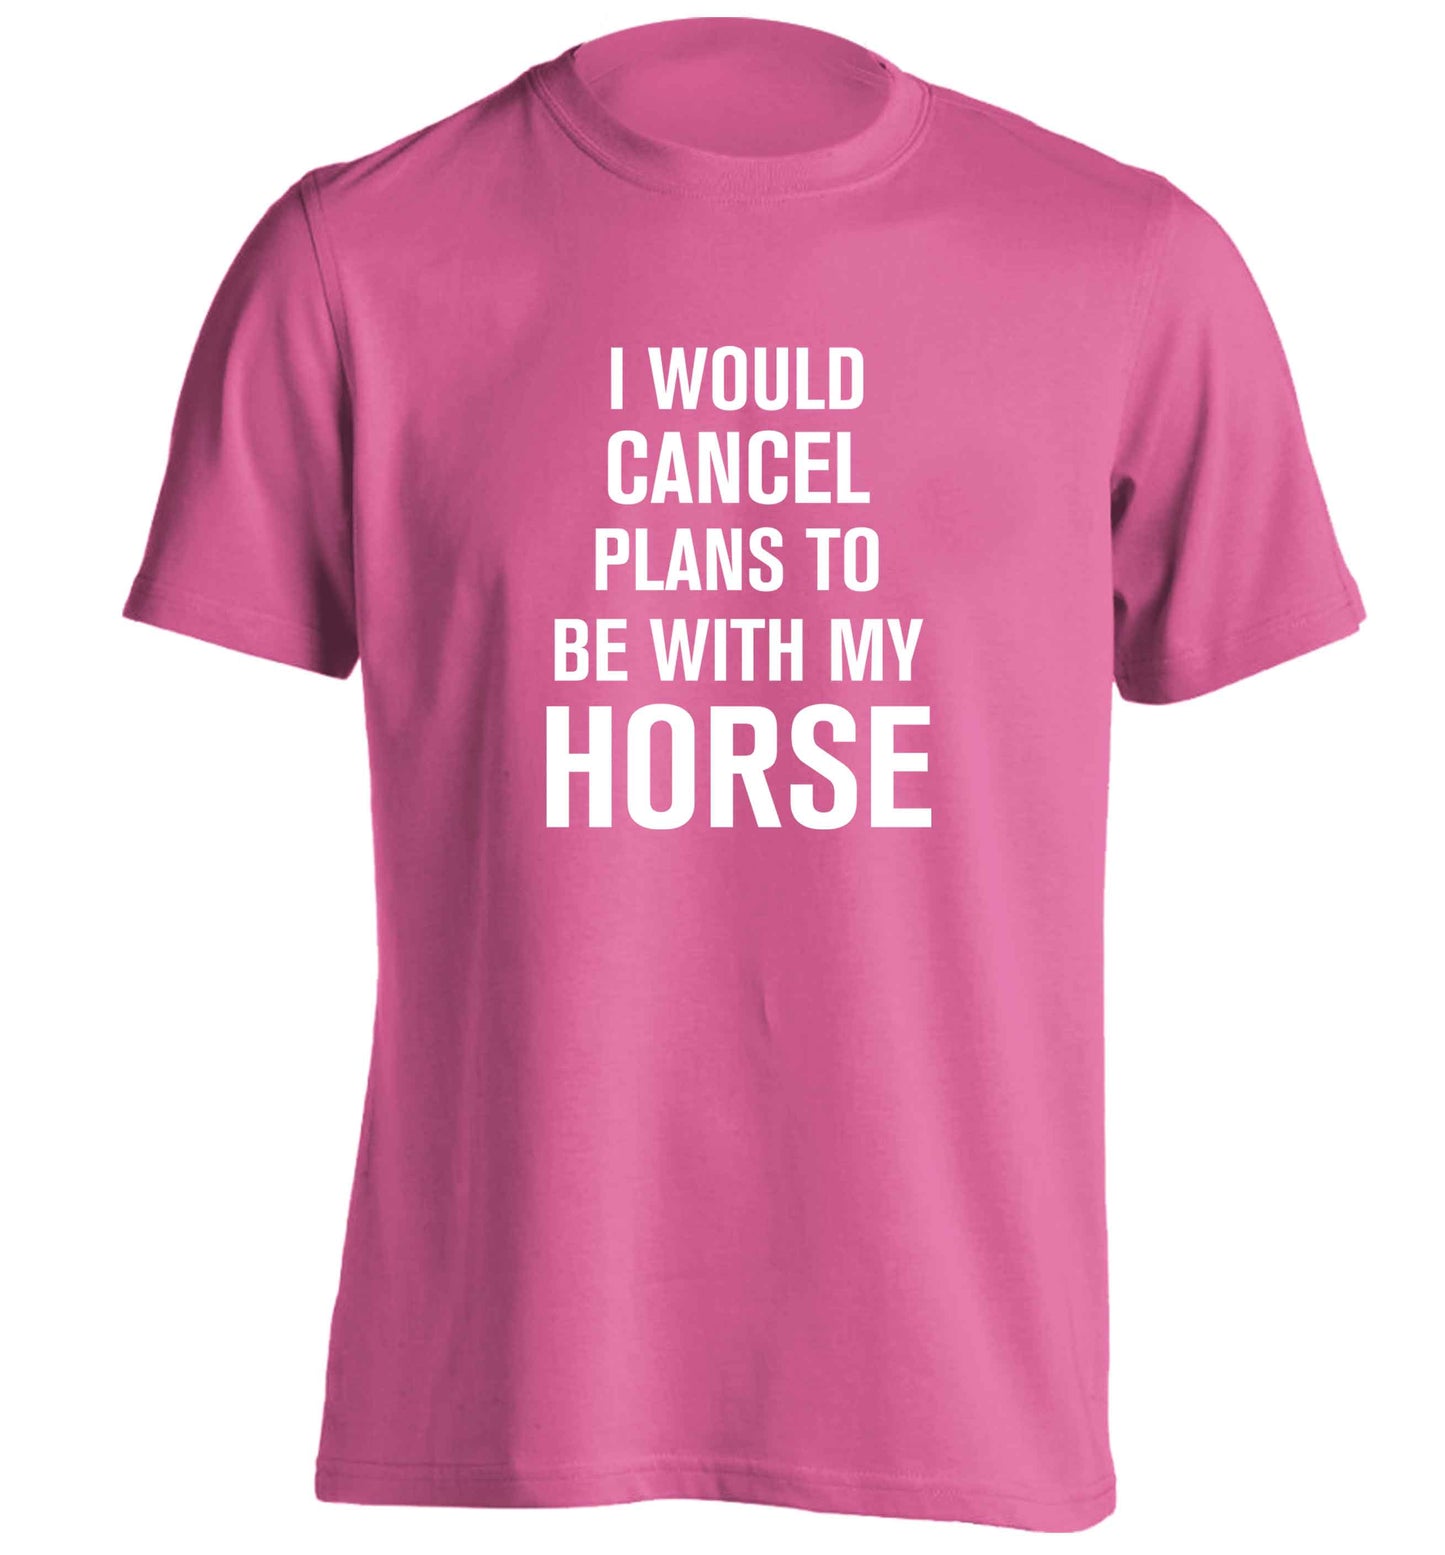 I will cancel plans to be with my horse adults unisex pink Tshirt 2XL